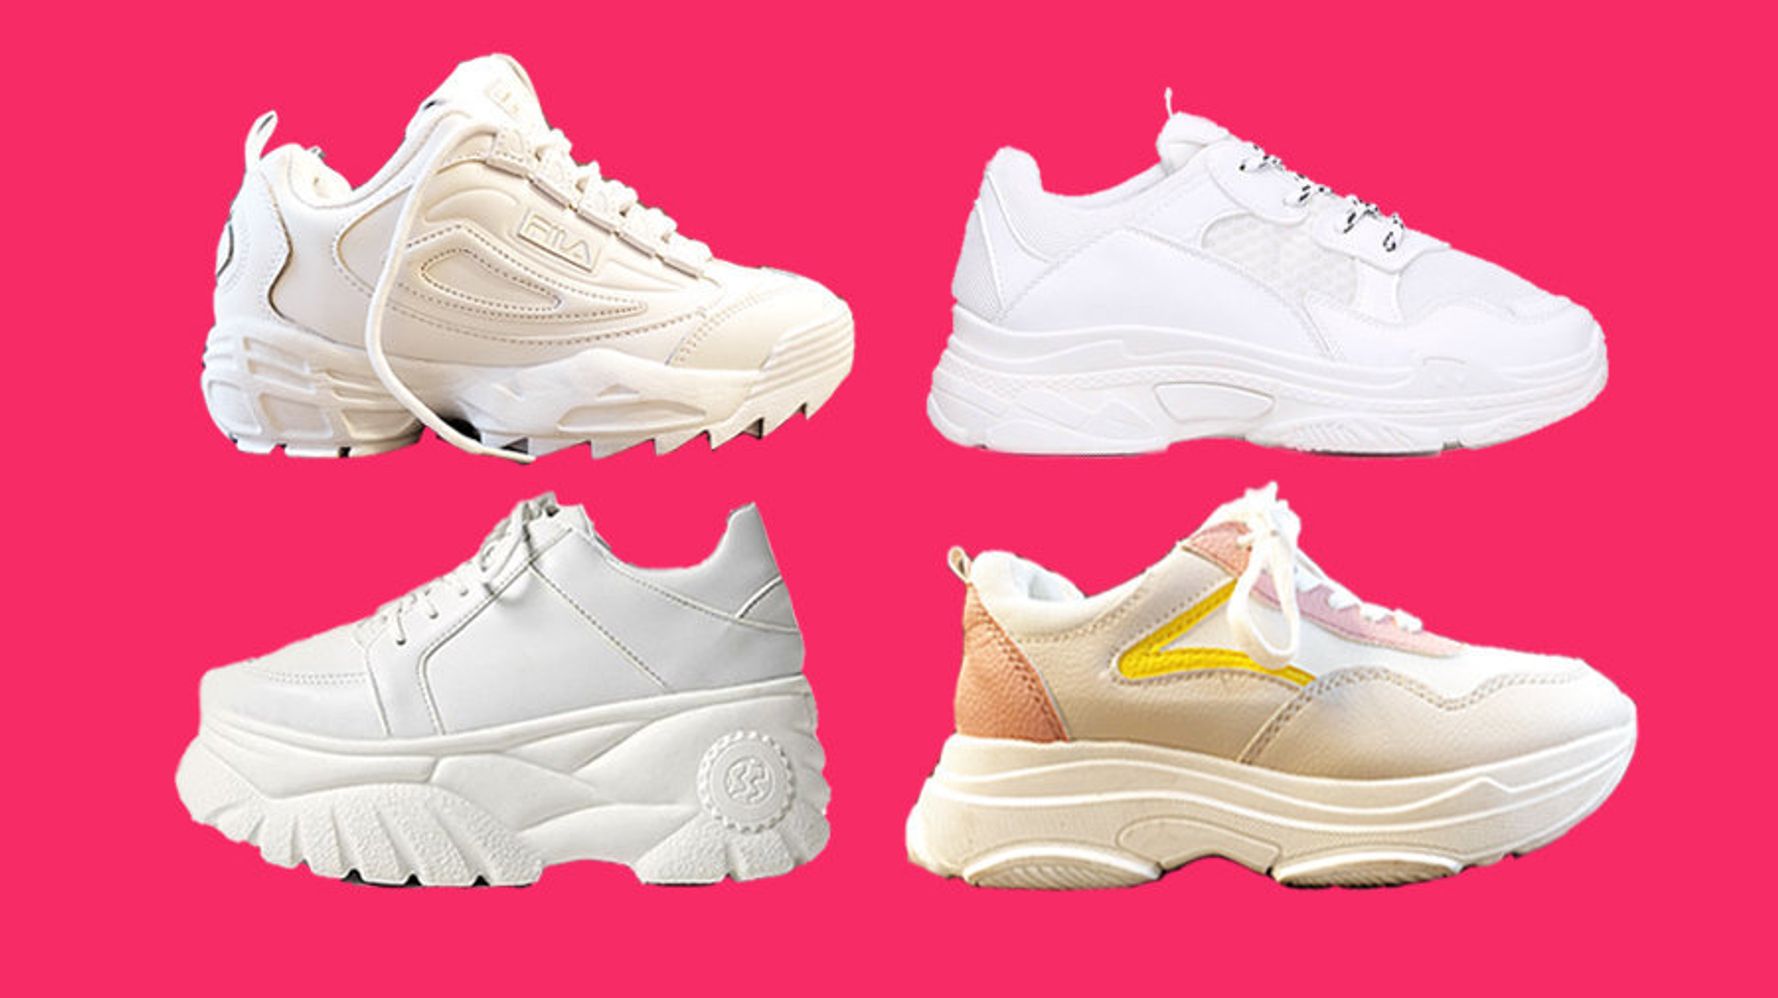 Disruptor White Chunky Trainers Primark And Other Cheaper Alternatives | HuffPost UK Life